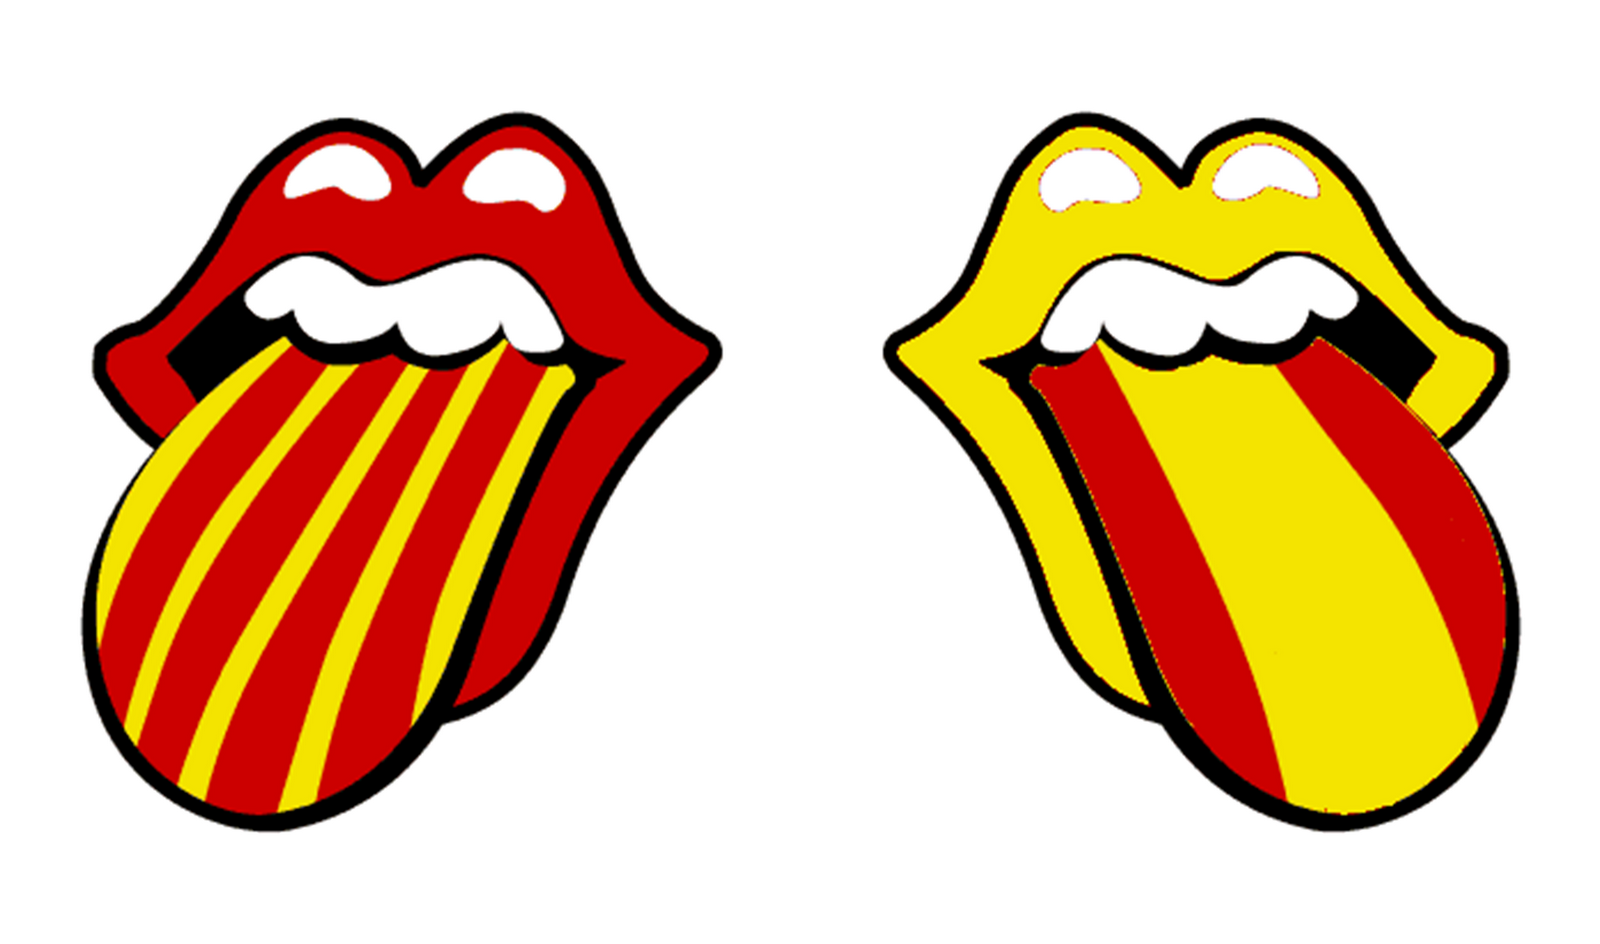 The Catalan Language: How to Learn Catalan Quickly » Fluent in 3